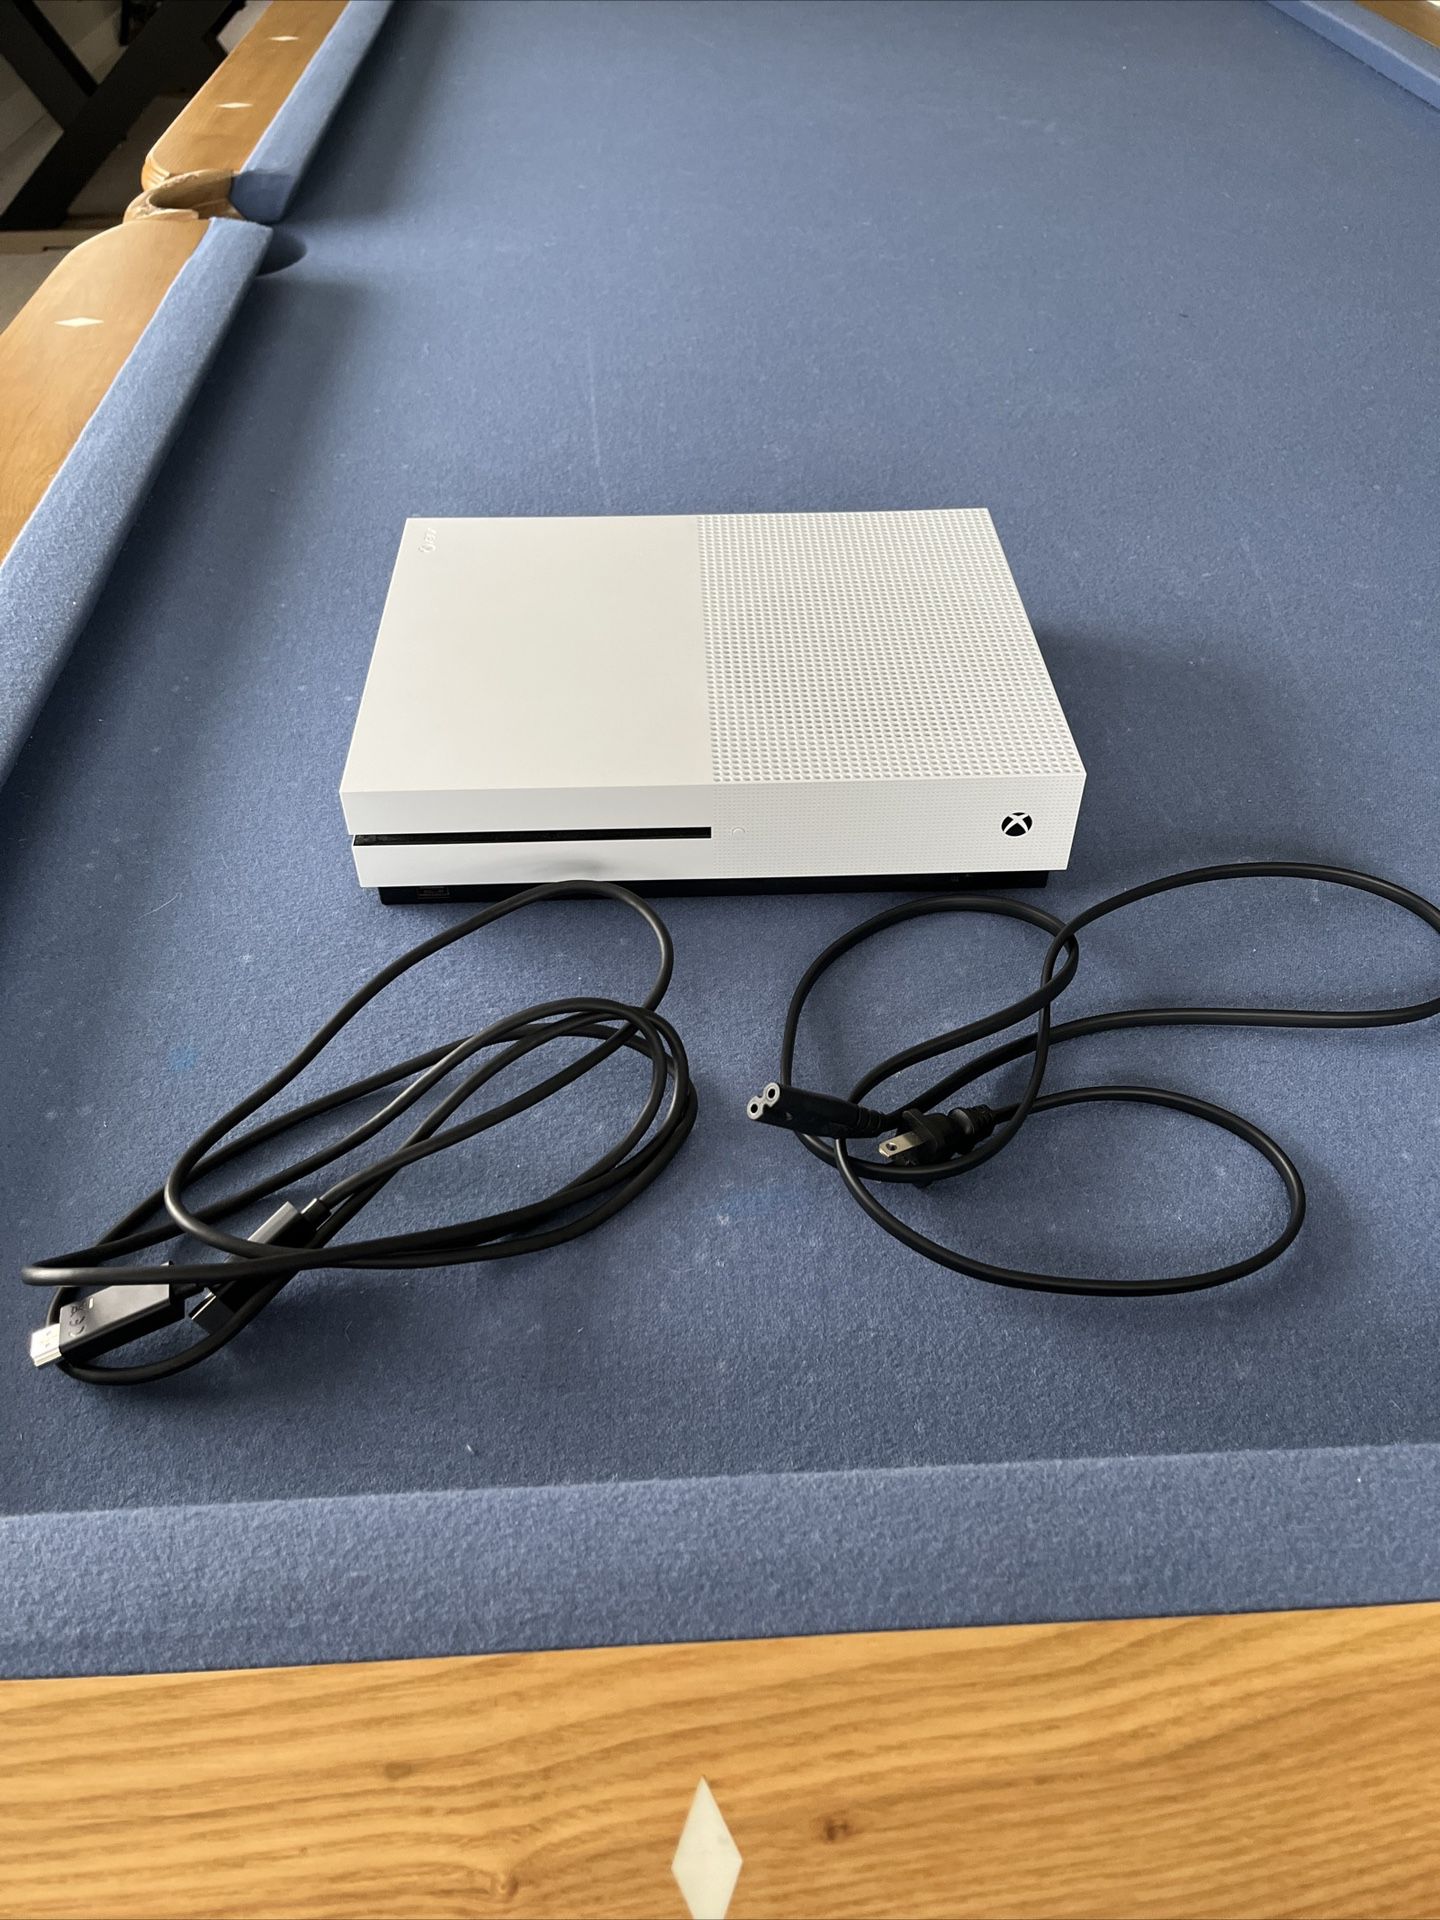 XBOX ONE S 1 TB Excellent condition 